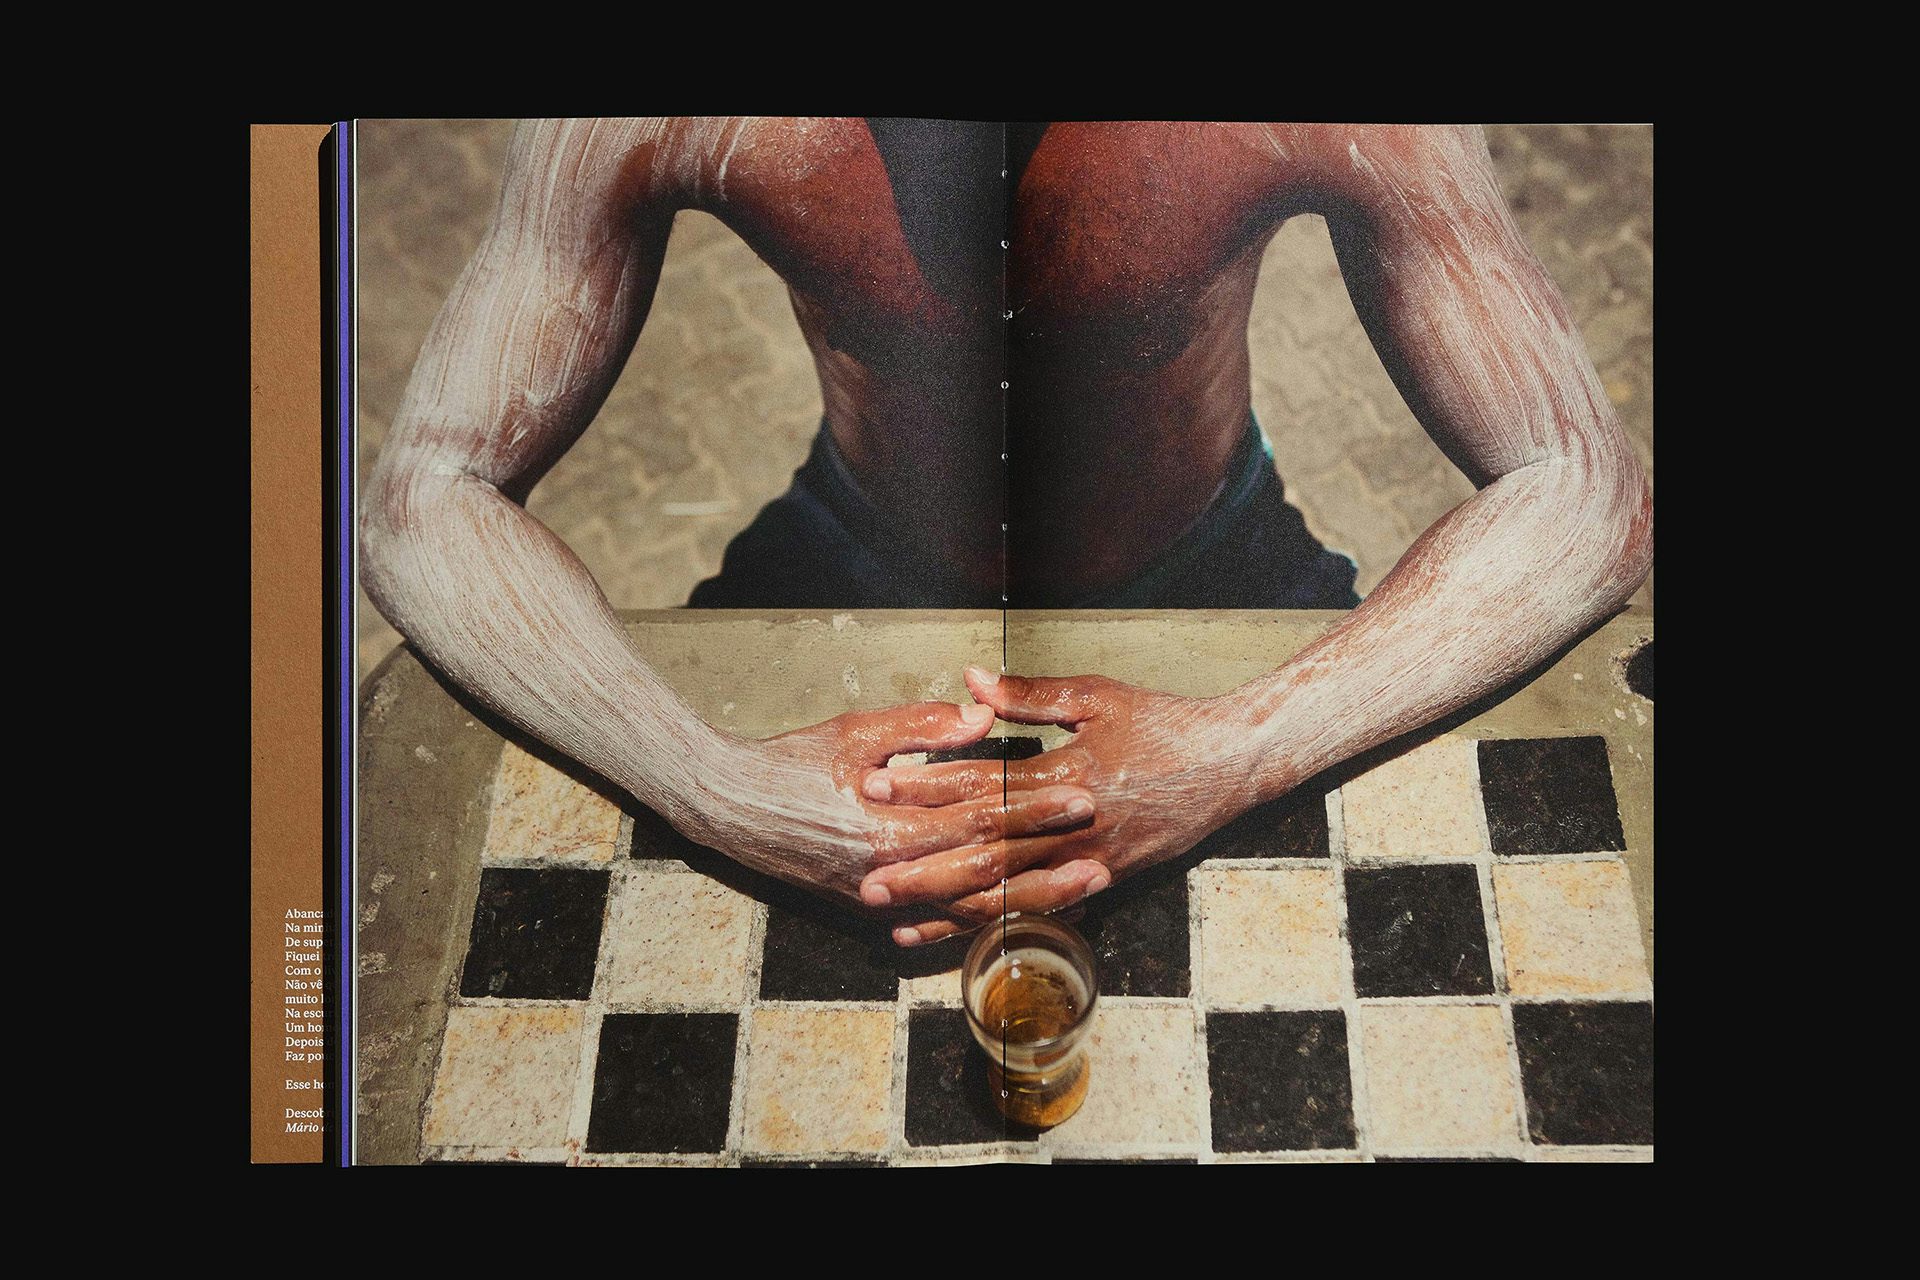 Spread from Quilo magazine showing a person with white paste covering their arms leaning on a chess table